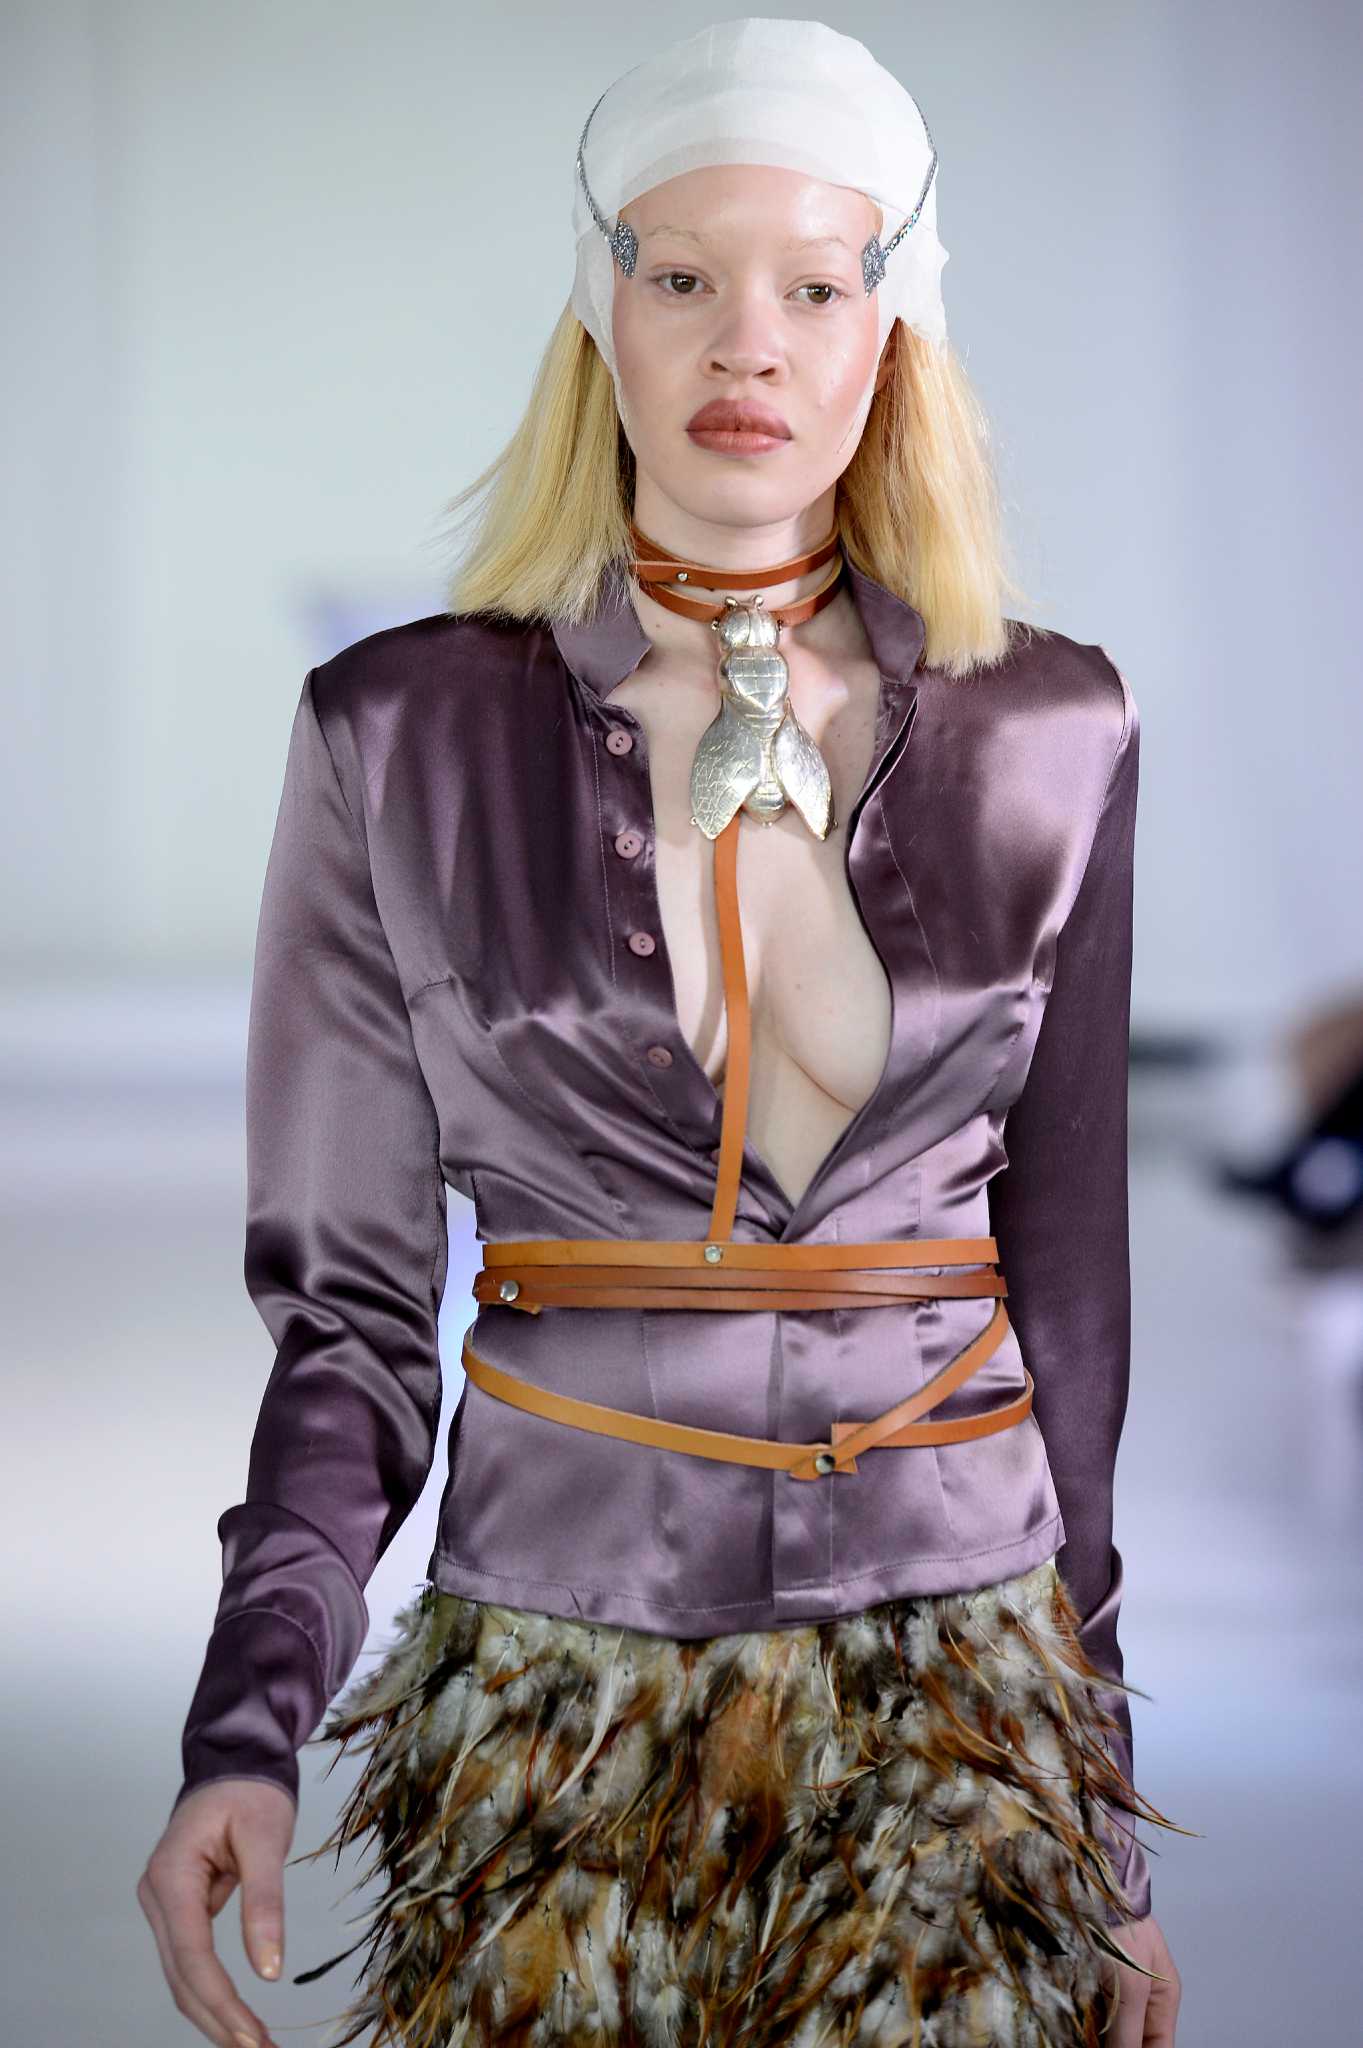 Model With 24-inch Waist Allegedly 'Too Big' for Louis Vuitton Runway  [Updated] - Fashionista